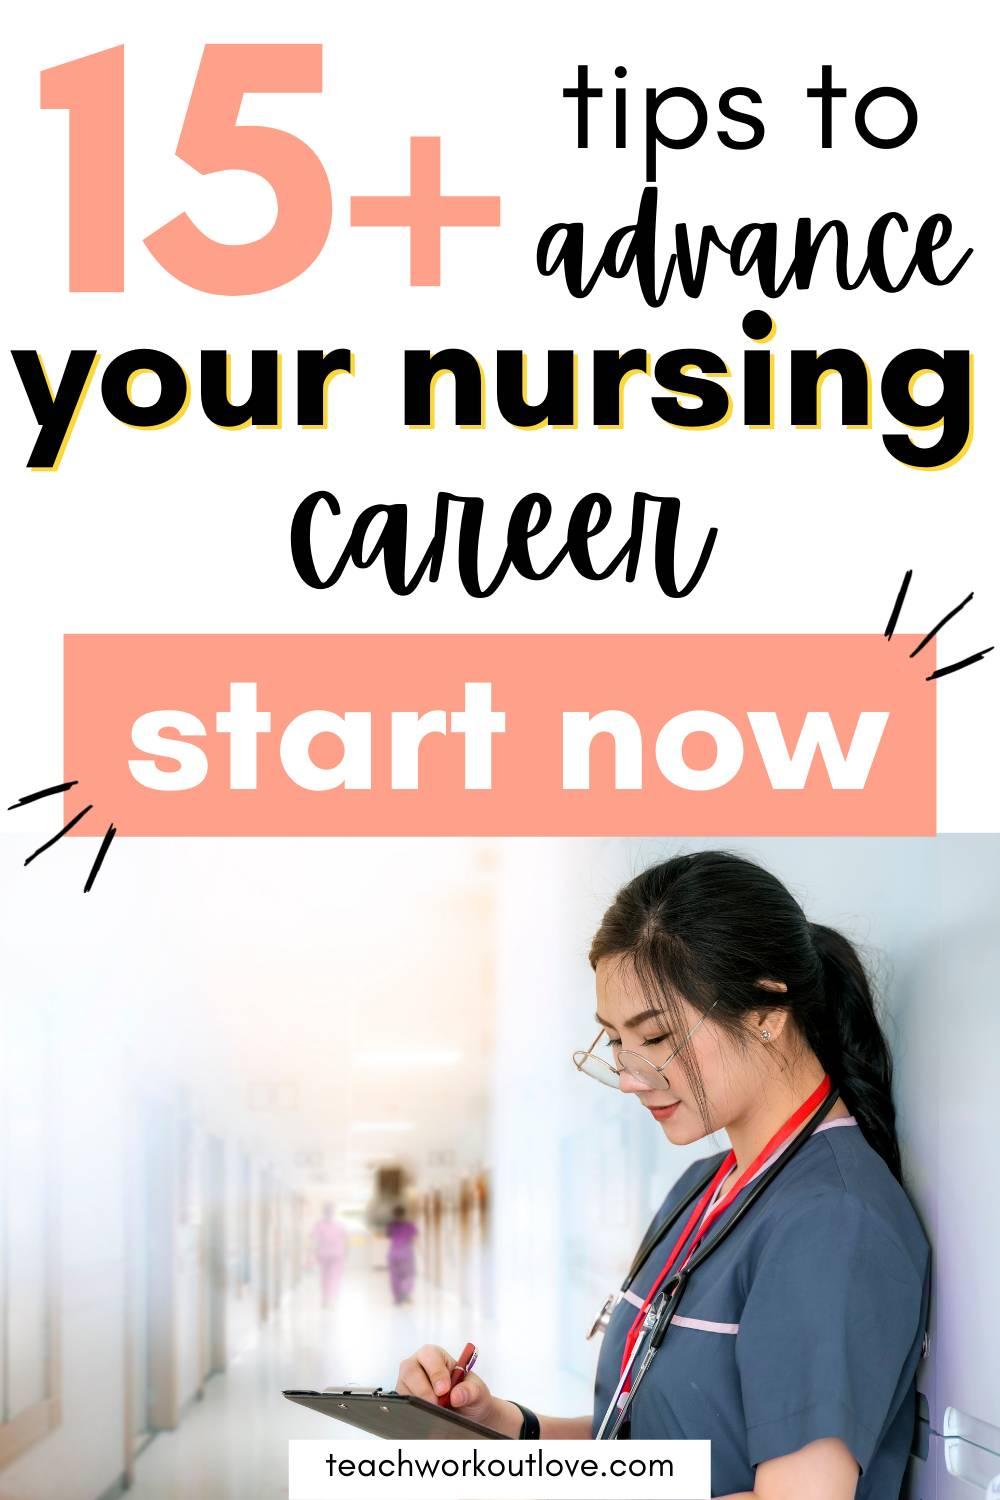 Nursing is an incredibly popular career for moms, whether they were nurses before starting a family or have entered the profession since. Nursing careers can be flexible and fulfilling, and it’s certainly a career that offers moms the chance to advance. It might not be easy, but these tips could help.